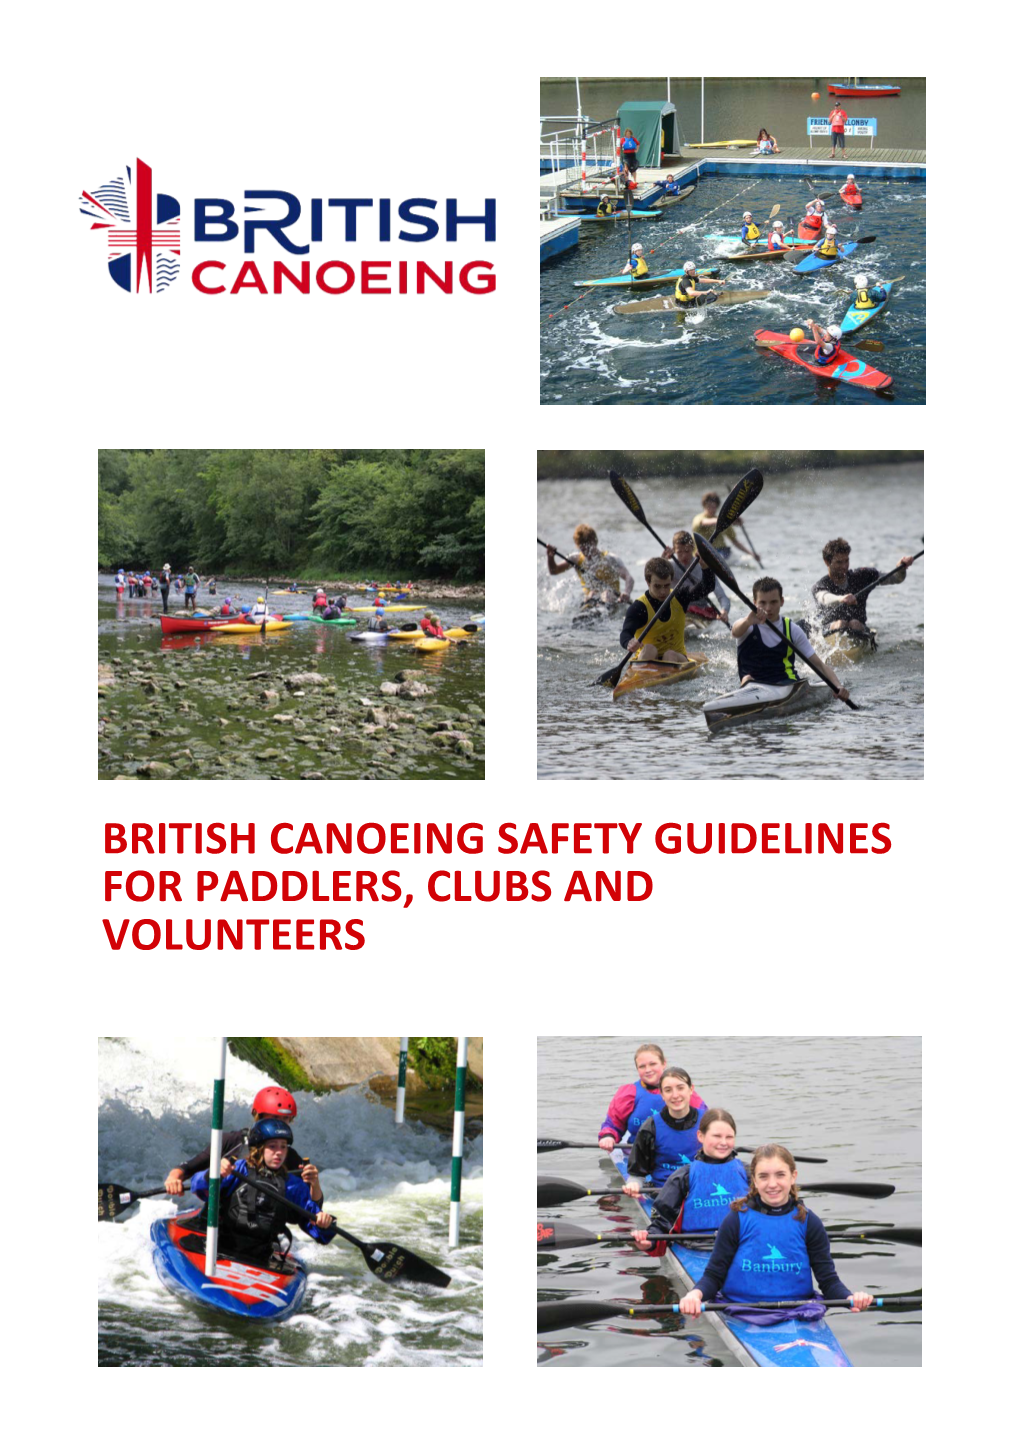 British Canoeing Safety Guidelines for Paddlers, Clubs and Volunteers